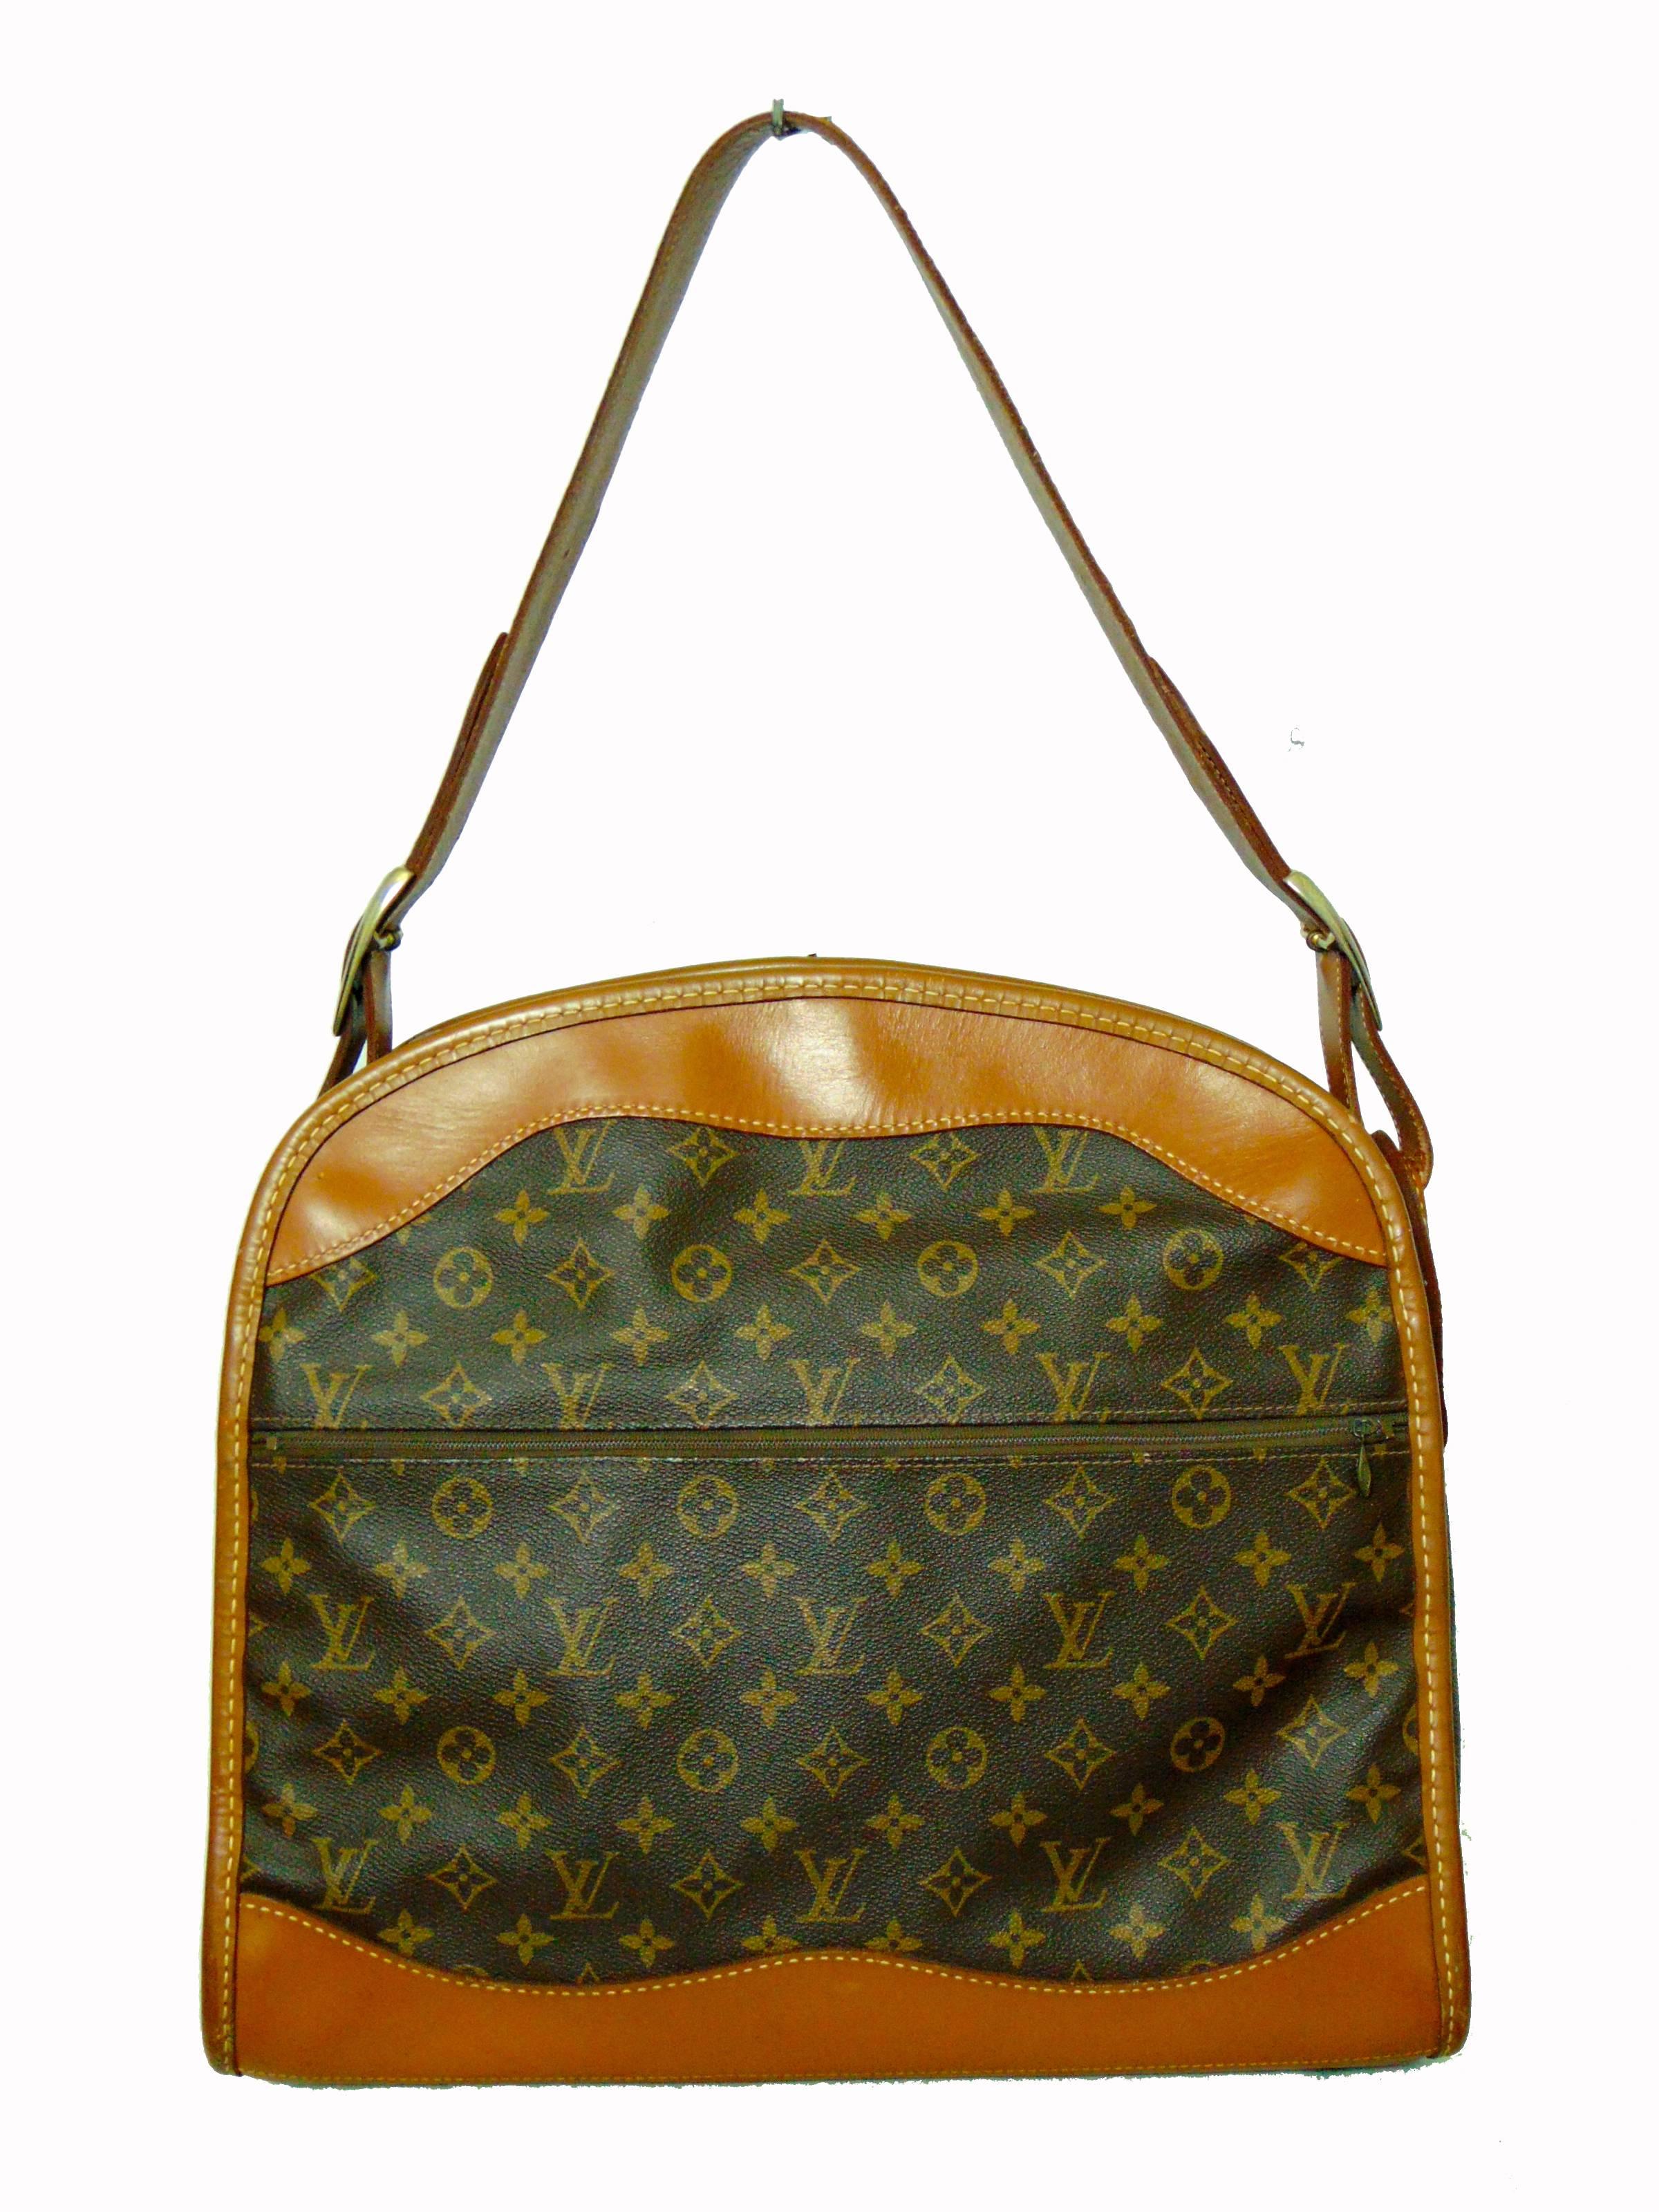 Louis Vuitton The French Company Carry On Travel Bag Monogram Canvas 1970s 1